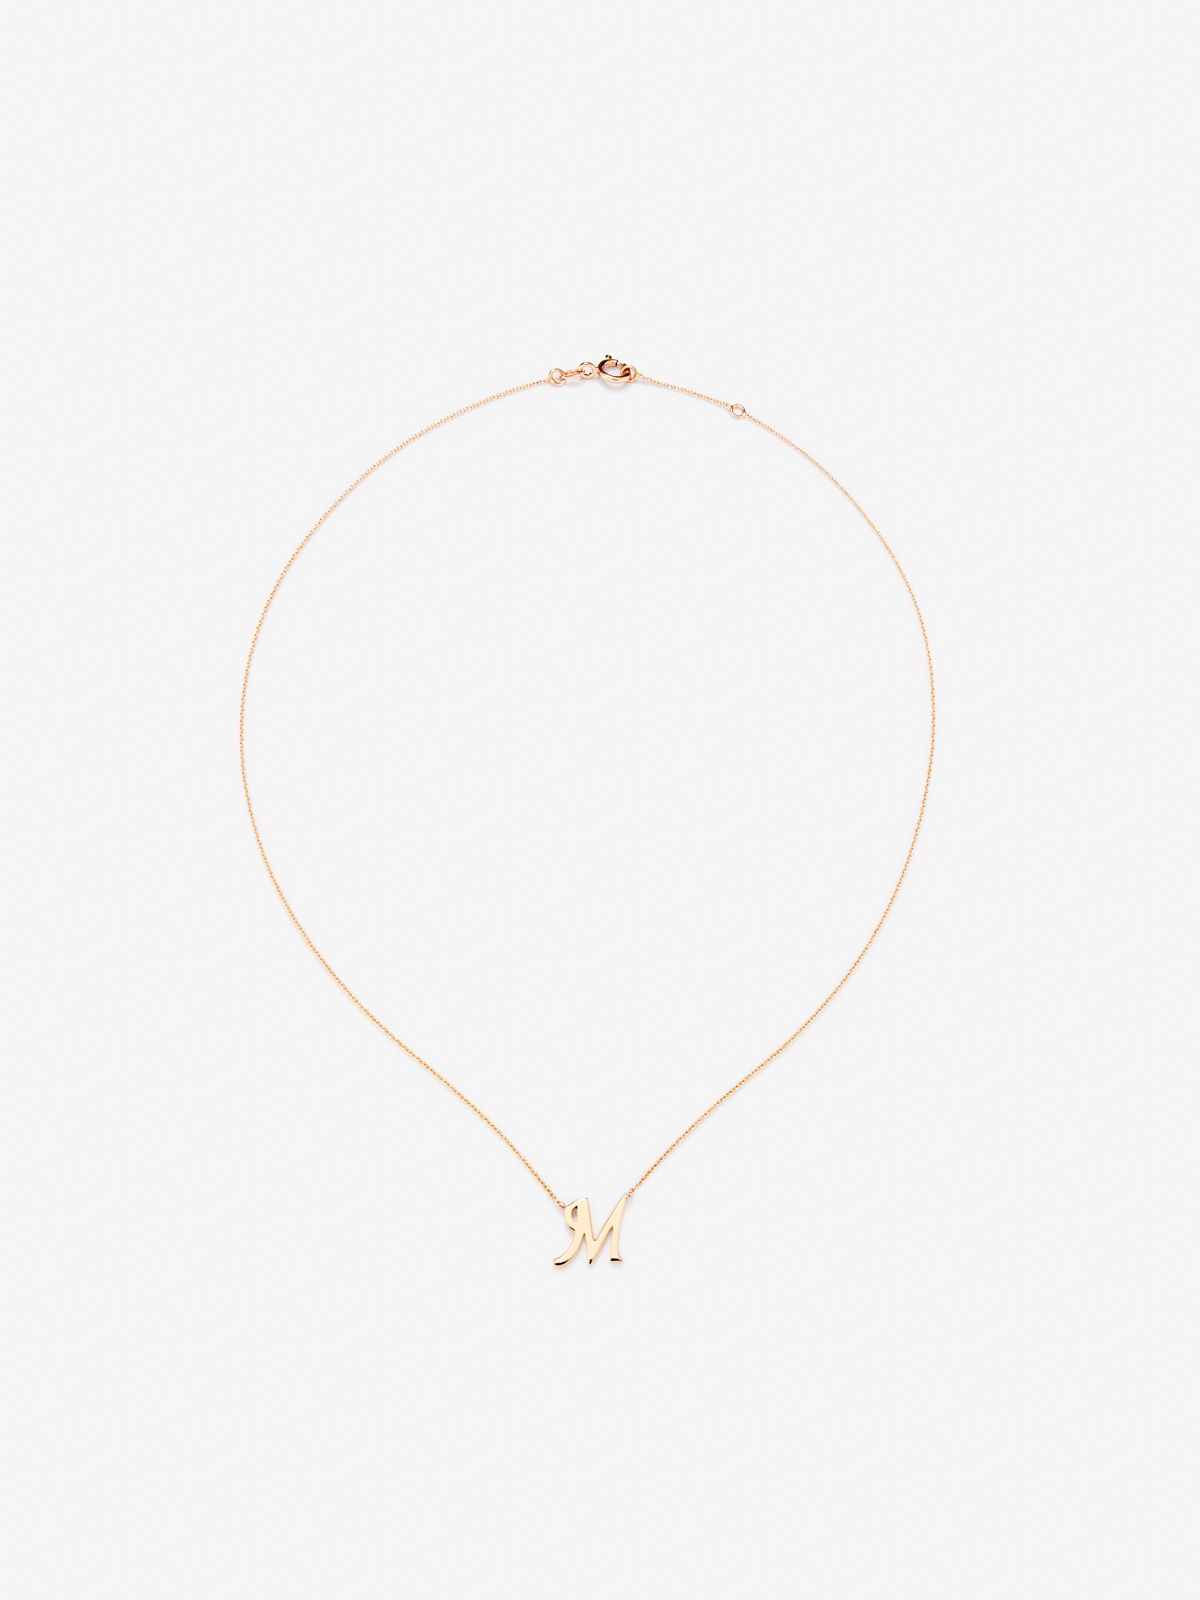 Pendant chain with initial 'm' in 18K rose gold.